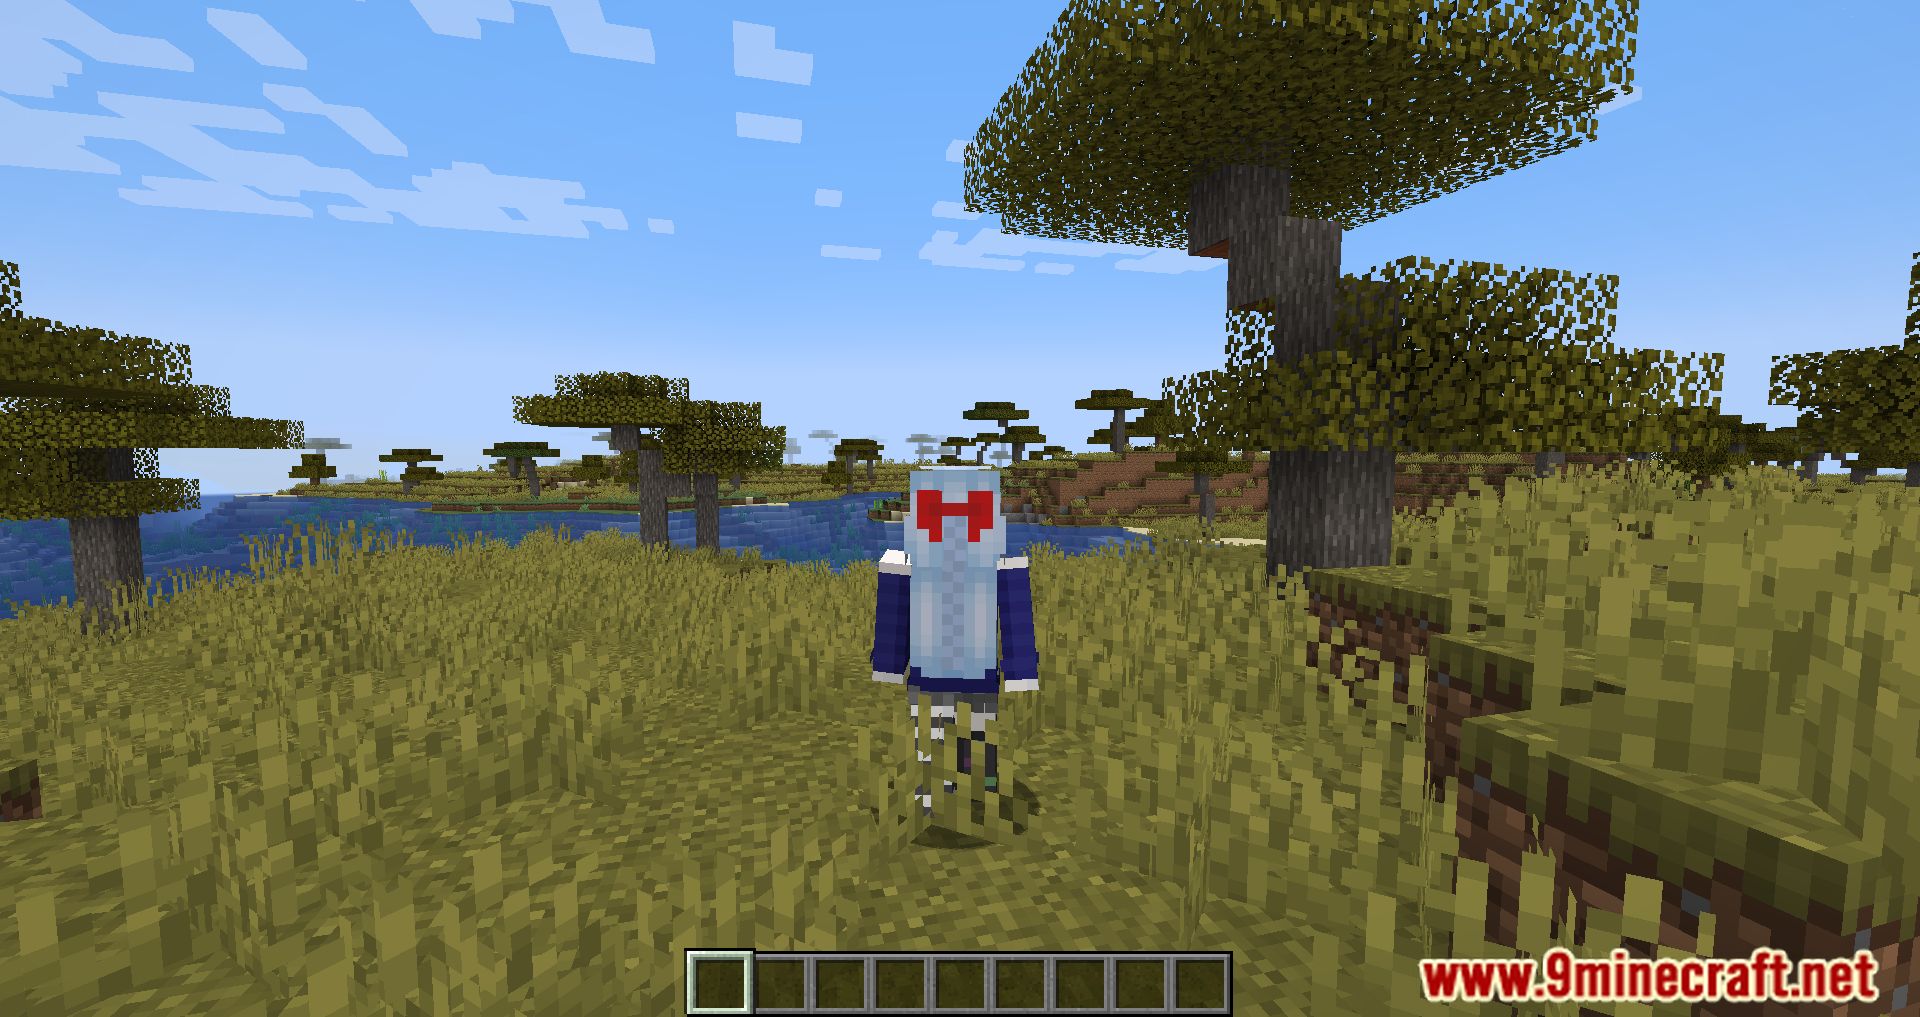 how to download a skin for minecraft